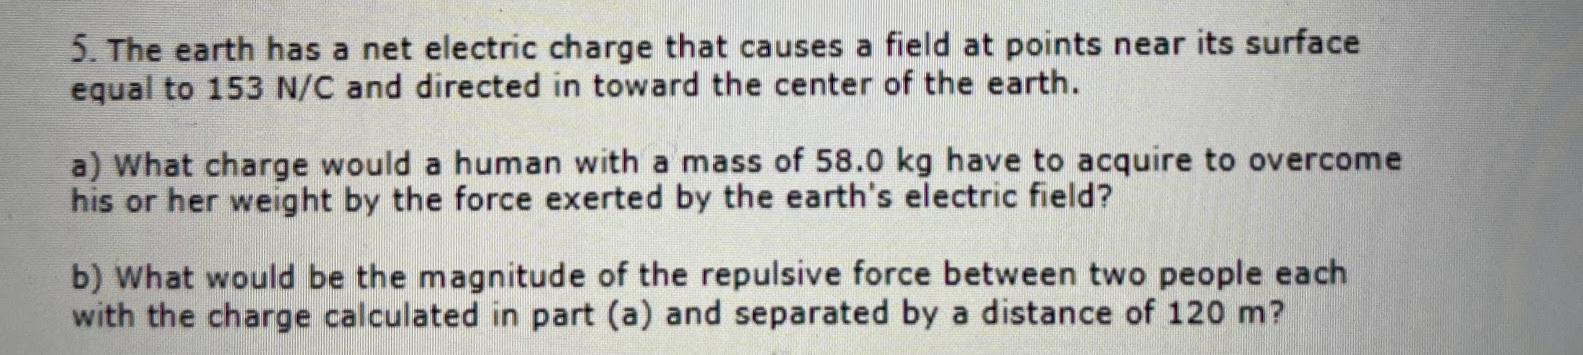 Solved 5. The earth has a net electric charge that causes a